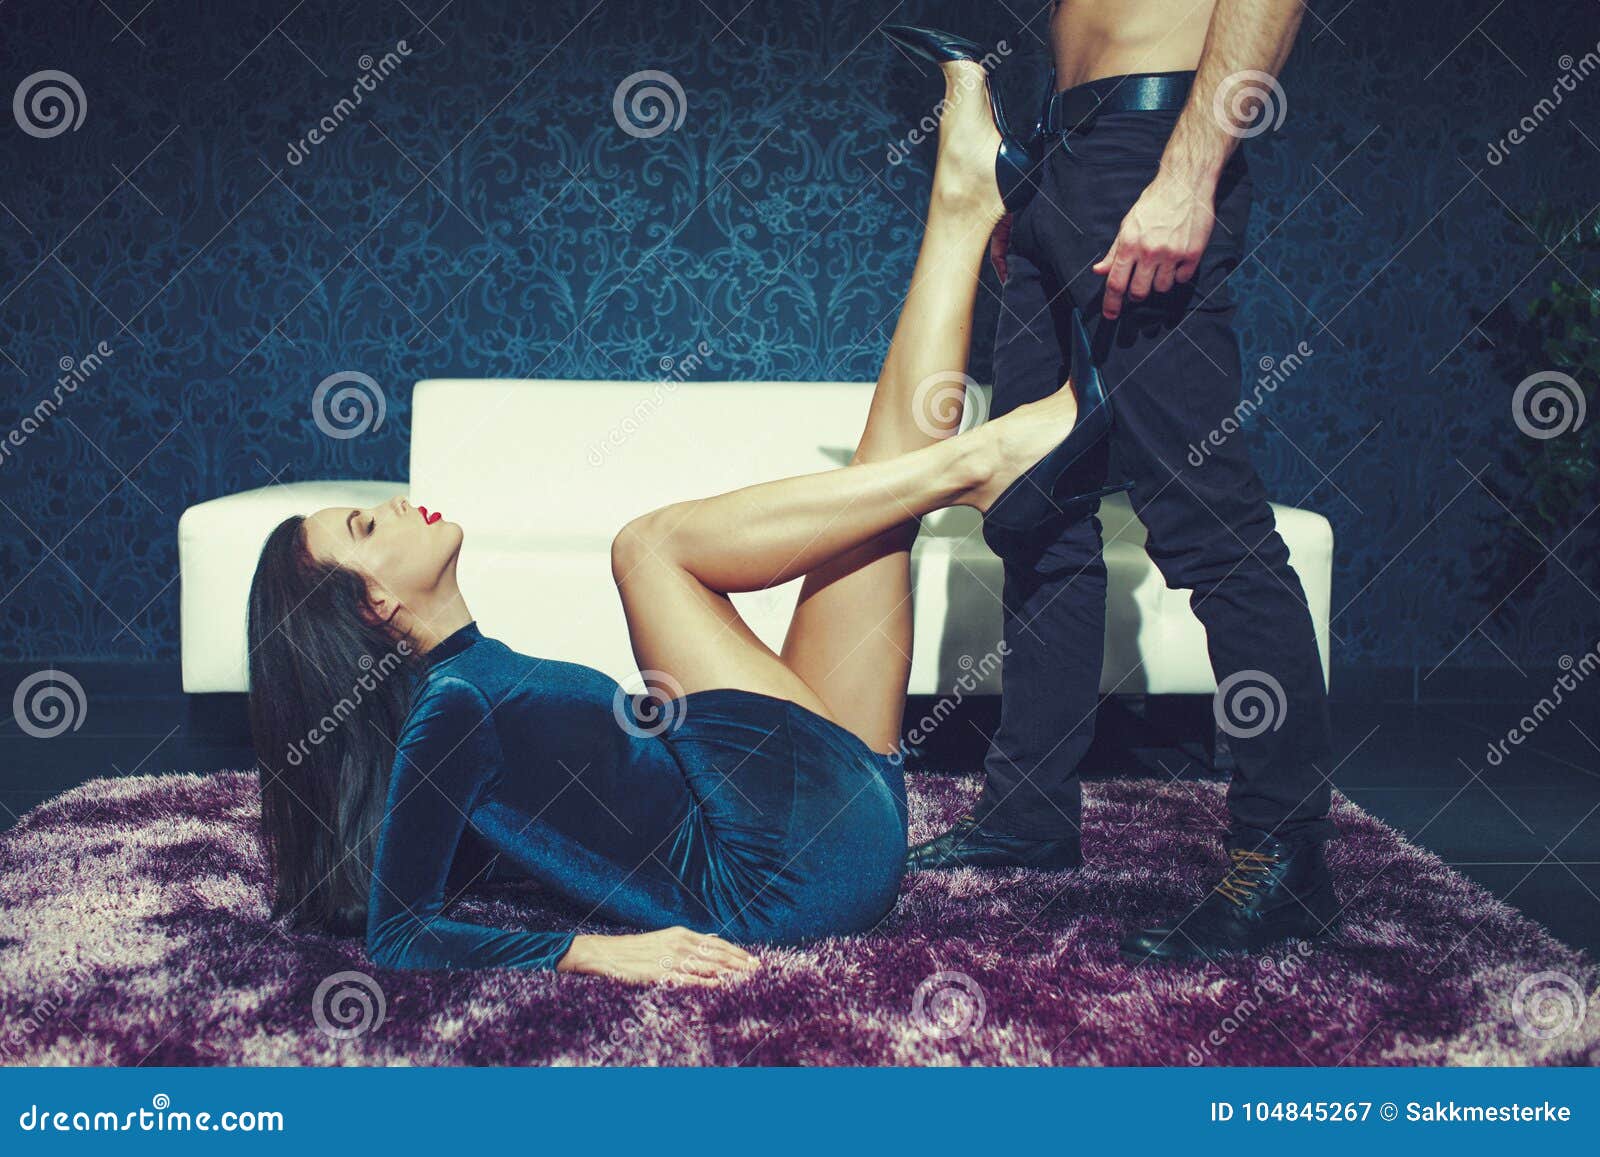 Sensual Woman on Carpet Playing on Man Abs by Her High Heel Stock Image